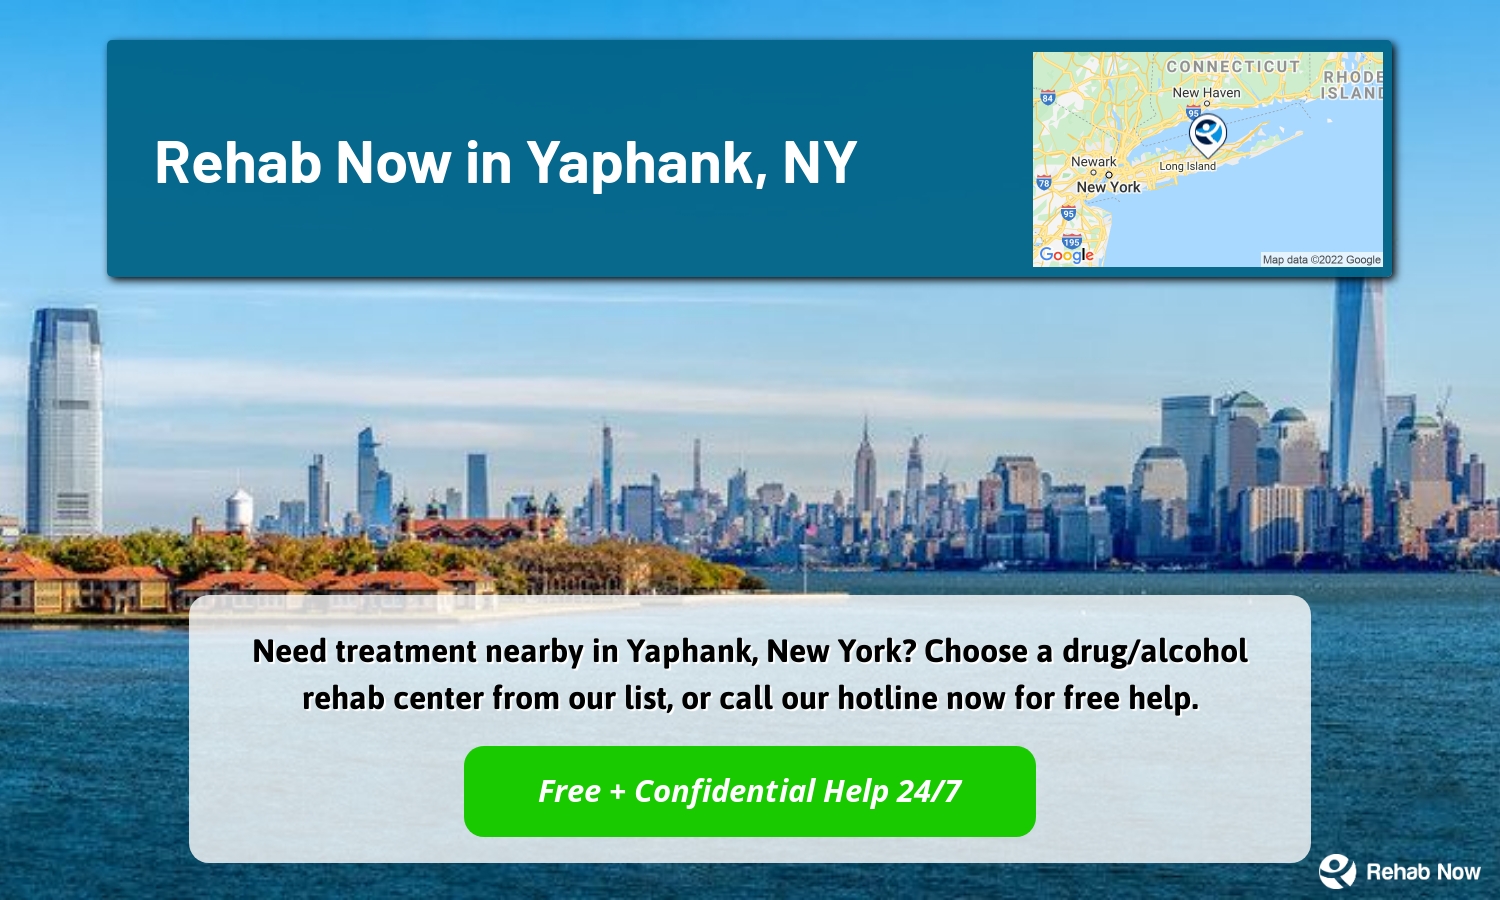 Need treatment nearby in Yaphank, New York? Choose a drug/alcohol rehab center from our list, or call our hotline now for free help.